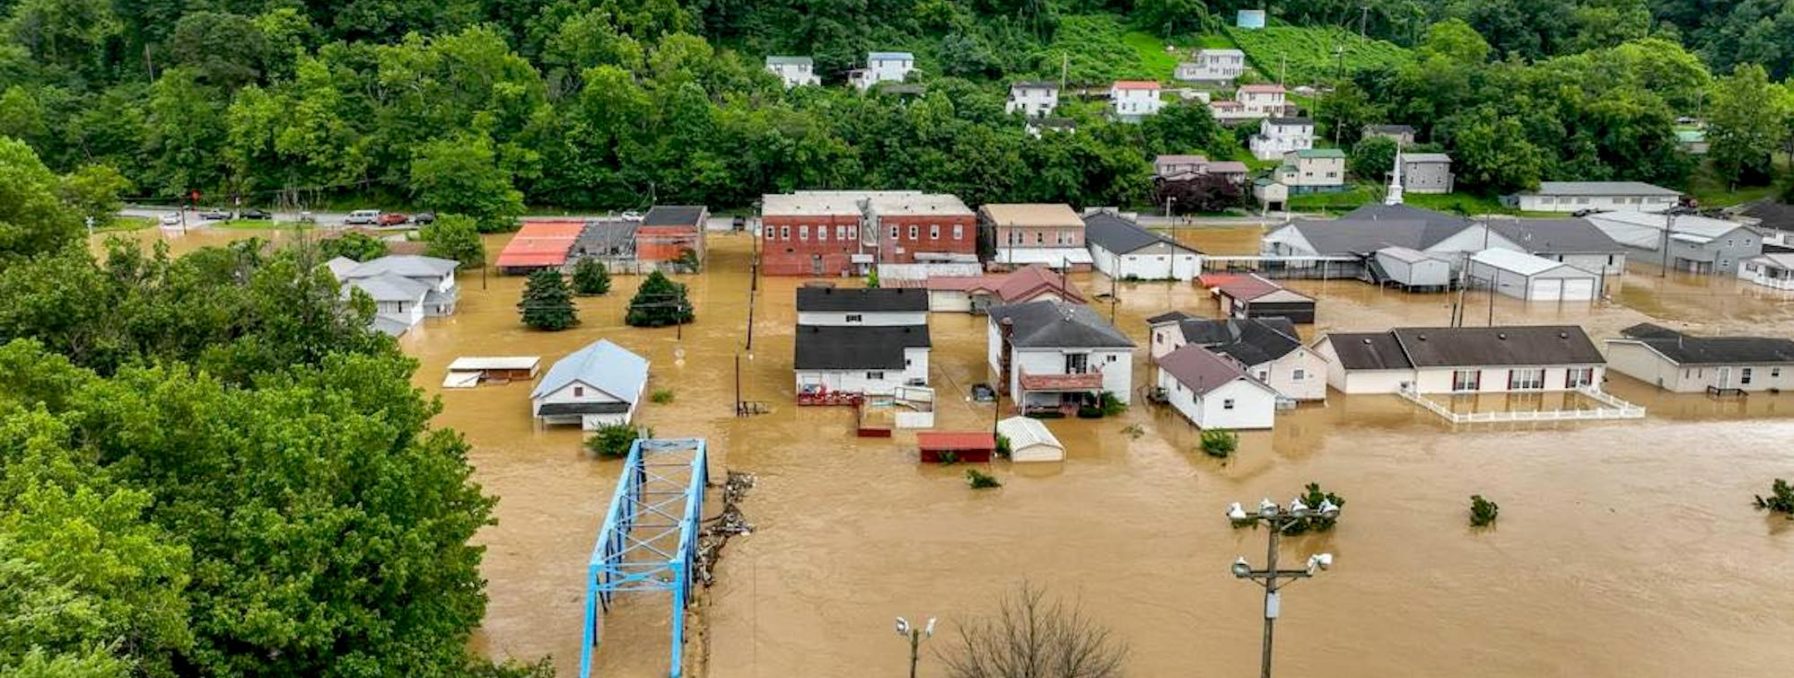 Homes and buildings of a town are severely foooding by standing water after 13 inches of rain fell in eastern Kentucky. Lush trees are in the background